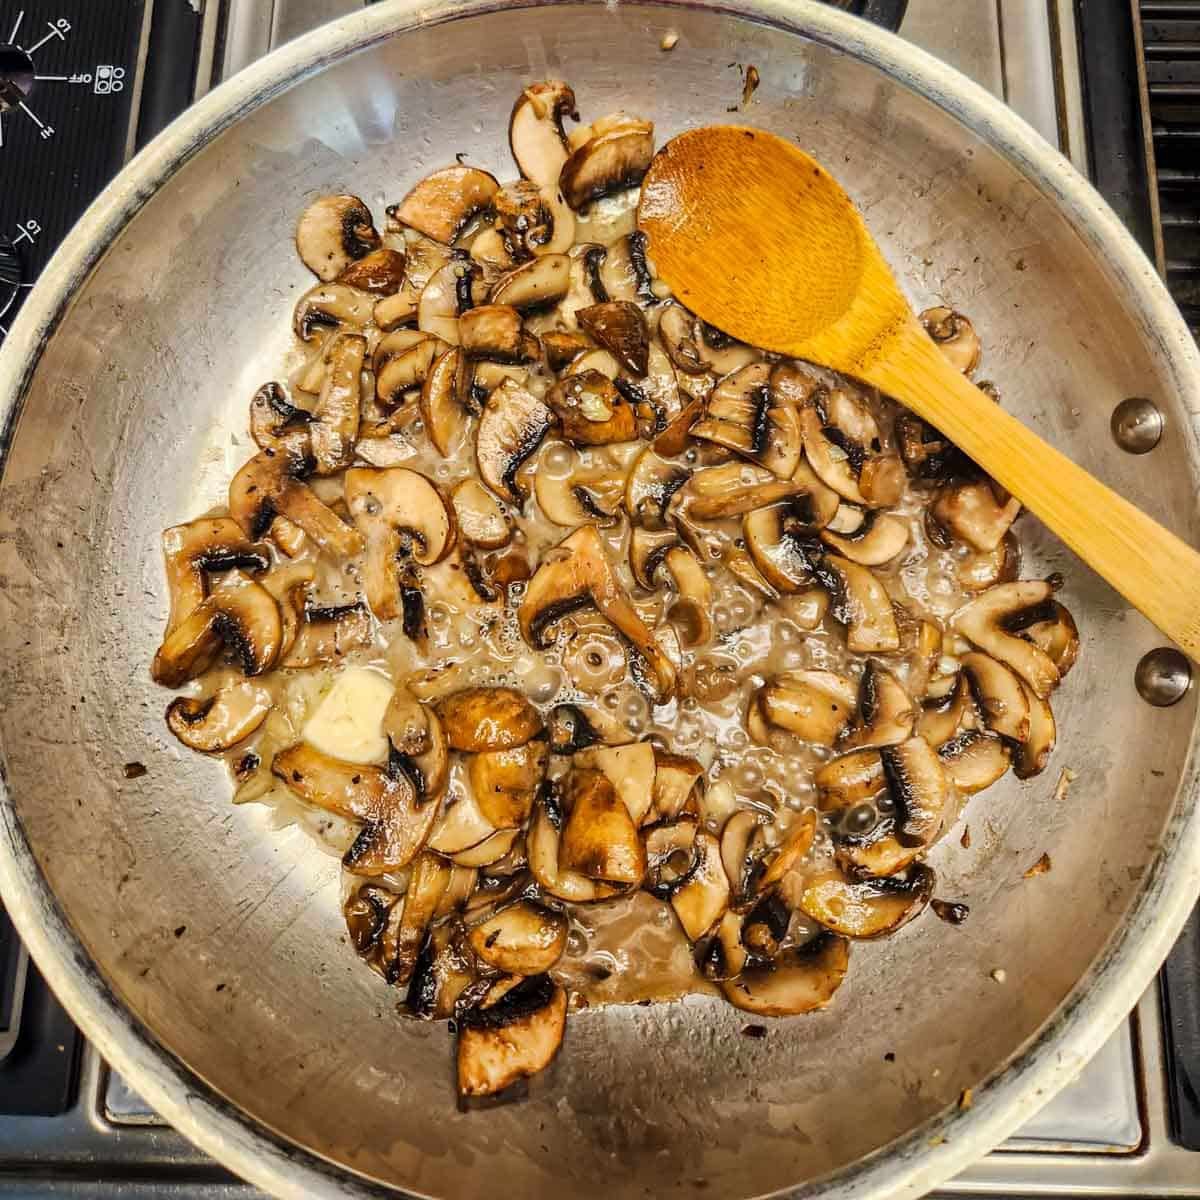 mushroom sauteeing in butter